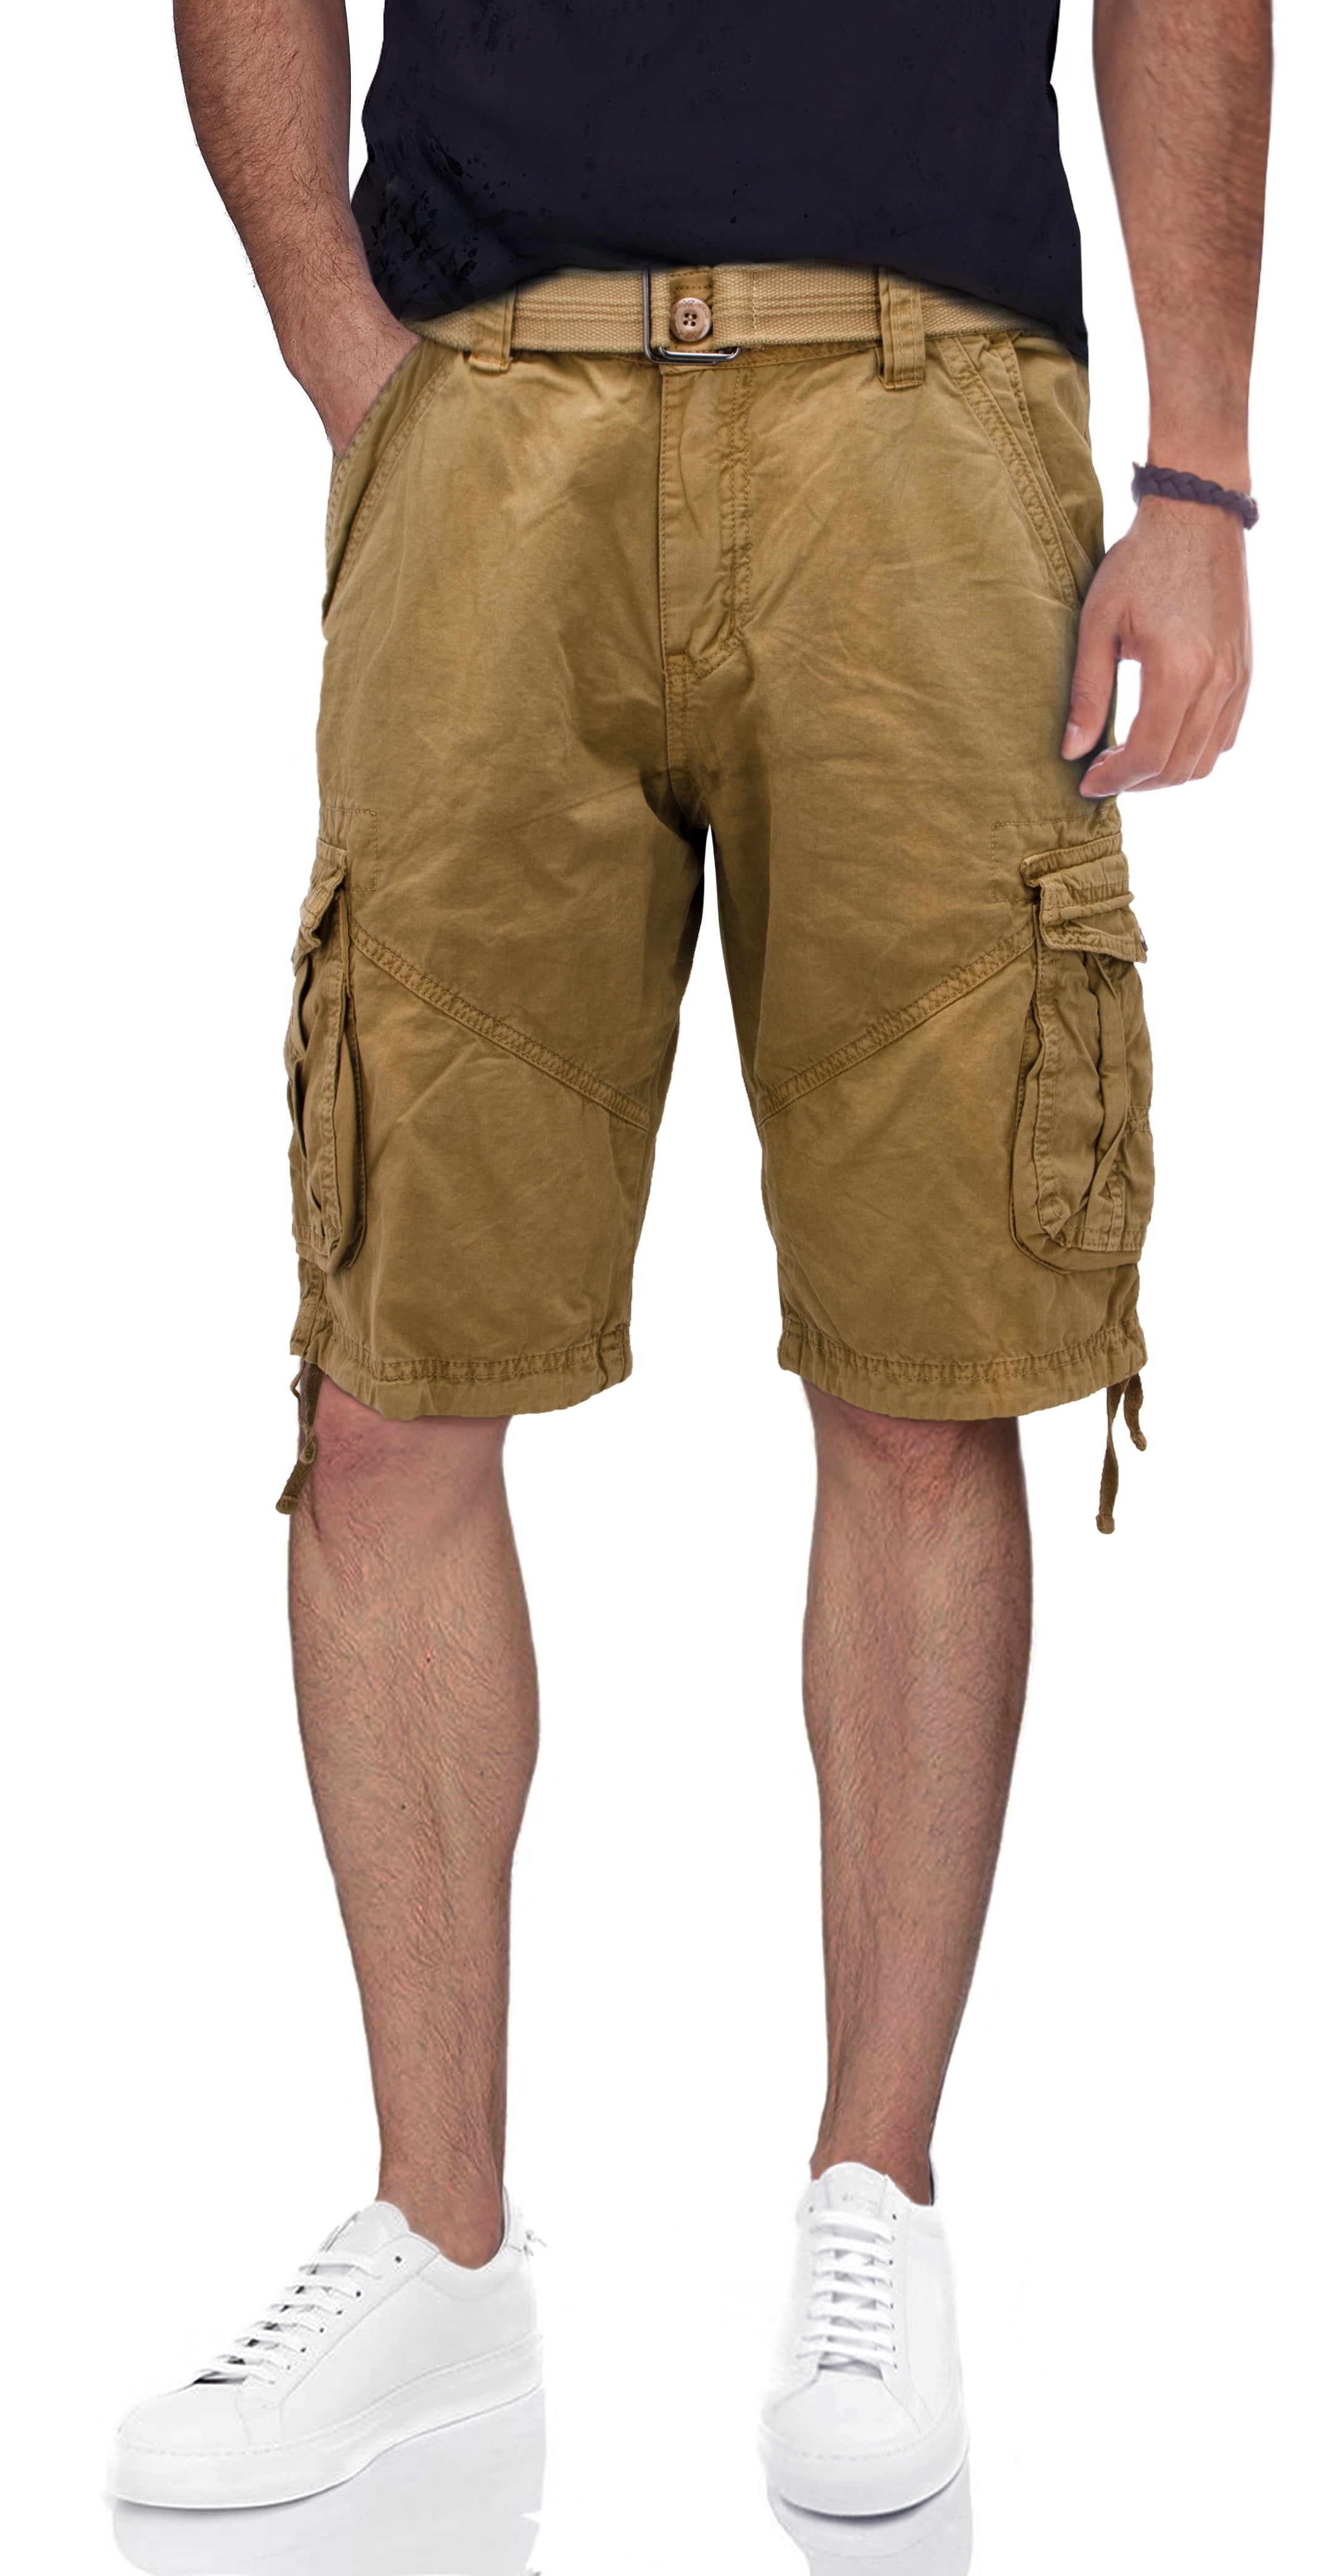 X RAY Mens Tactical Bermuda Cargo Shorts Camo and Solid Colors 12.5 Inseam Knee Length Classic Fit Multi Pocket 